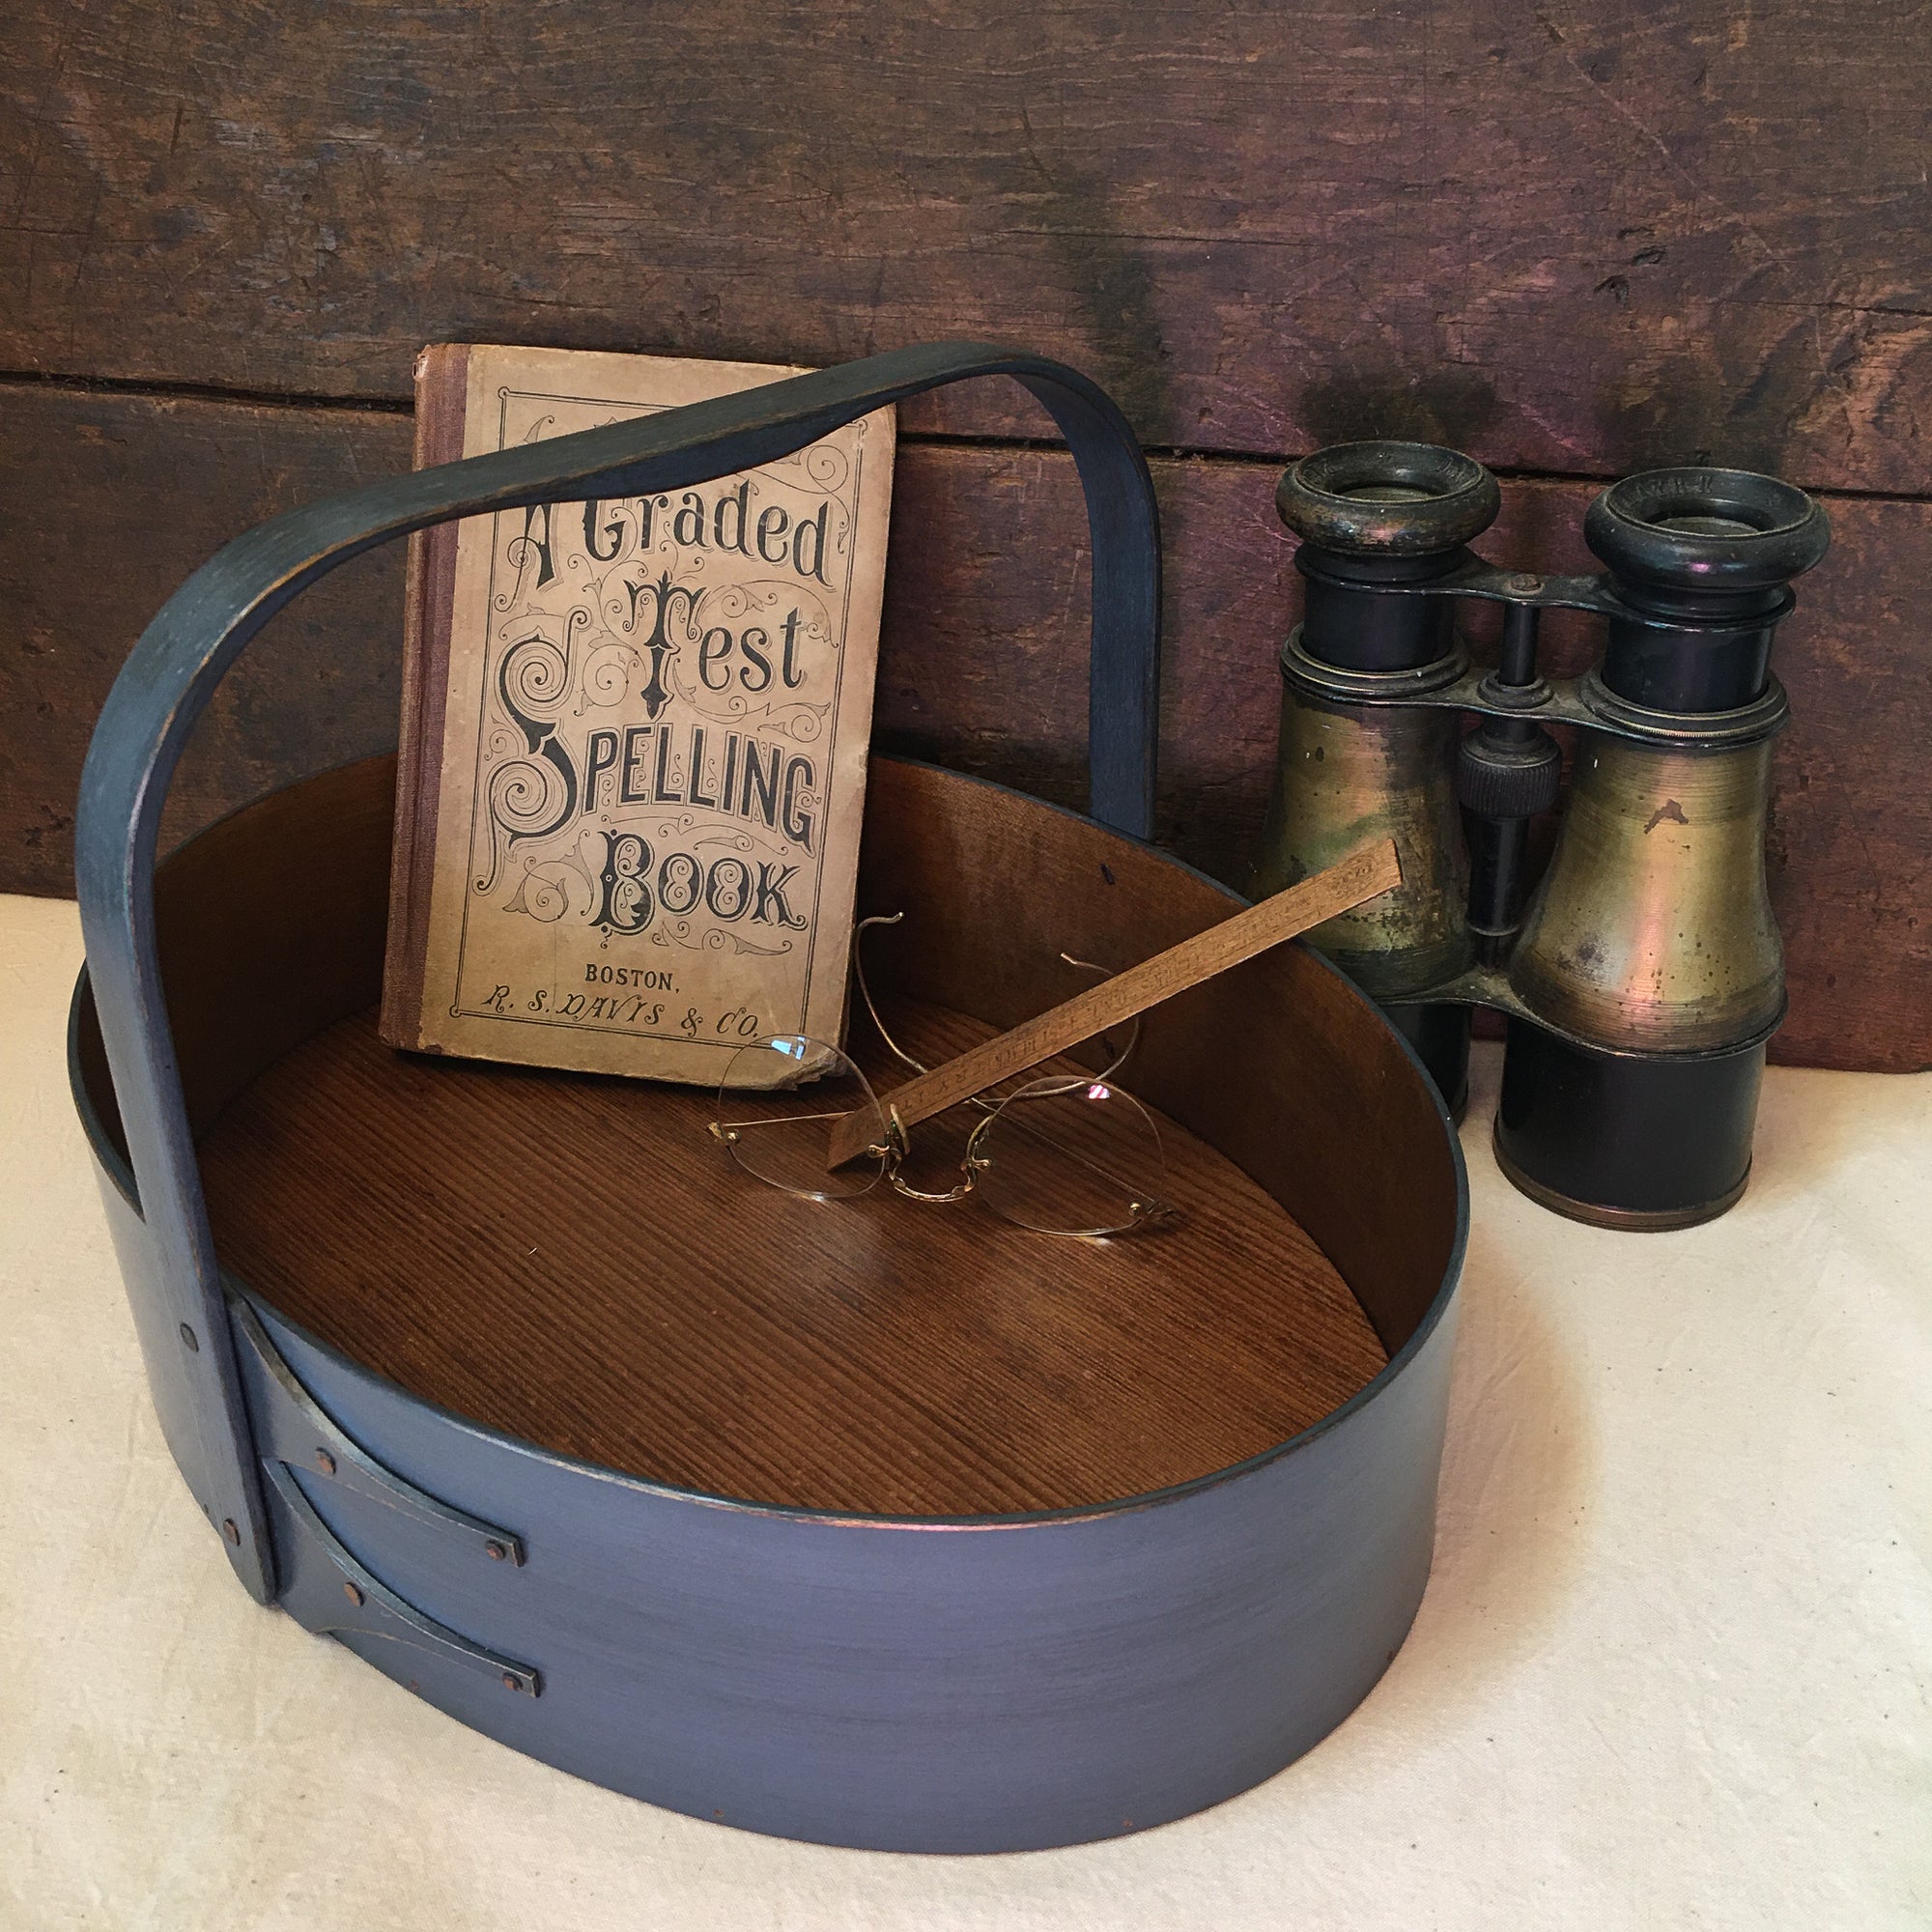 Large Shaker Style Sewing Carrier, LeHays Shaker Boxes, Handcrafted in Maine, Blue Milk Paint Finish, Holding Items